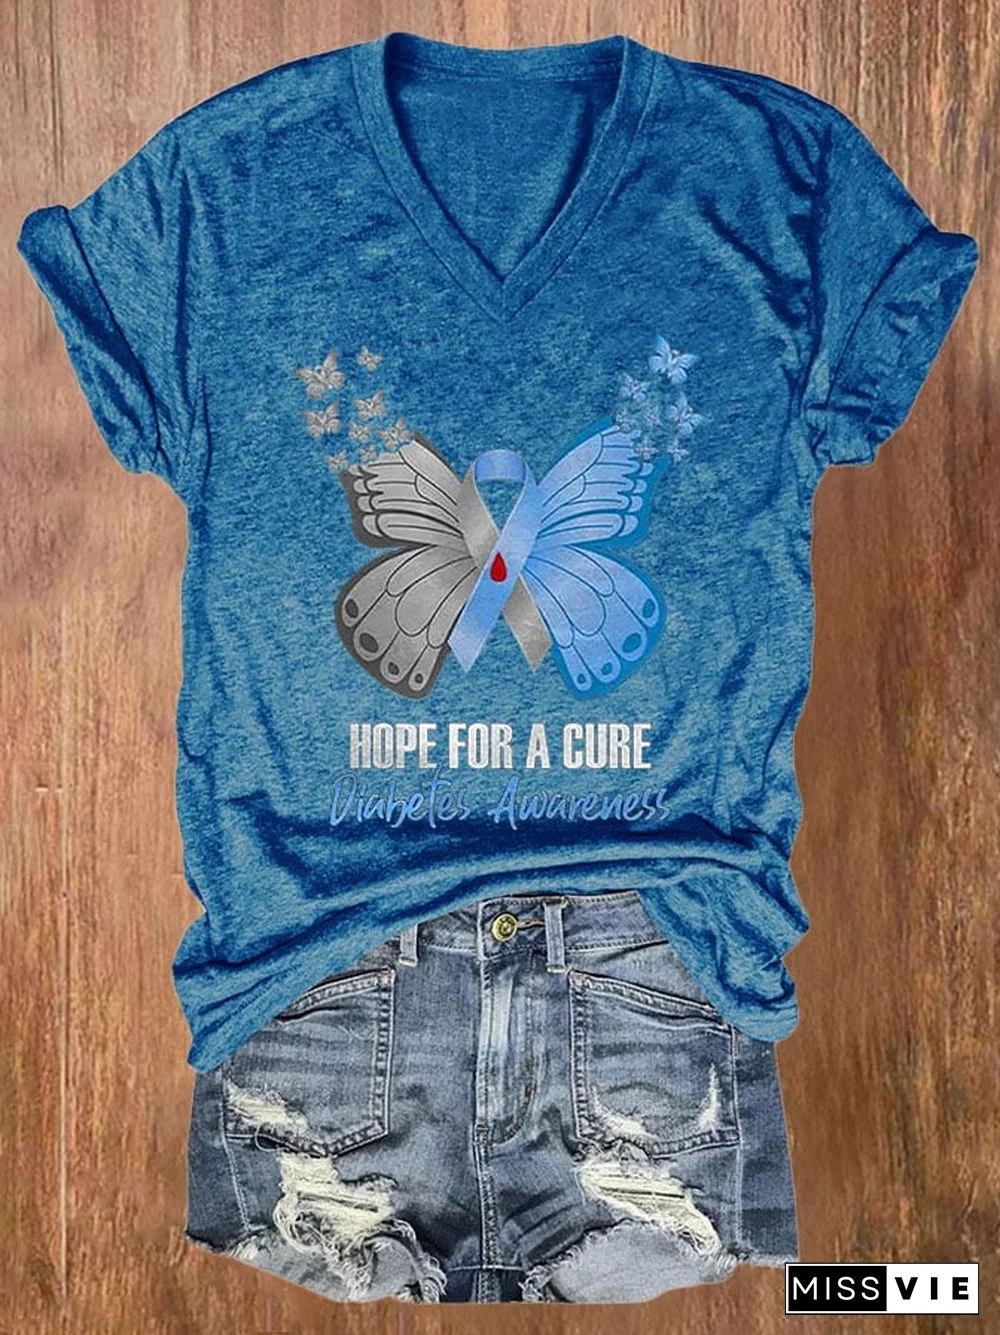 Women's Casual Hope For A Cure Diabetes Awareness Printed Short Sleeve T-Shirt